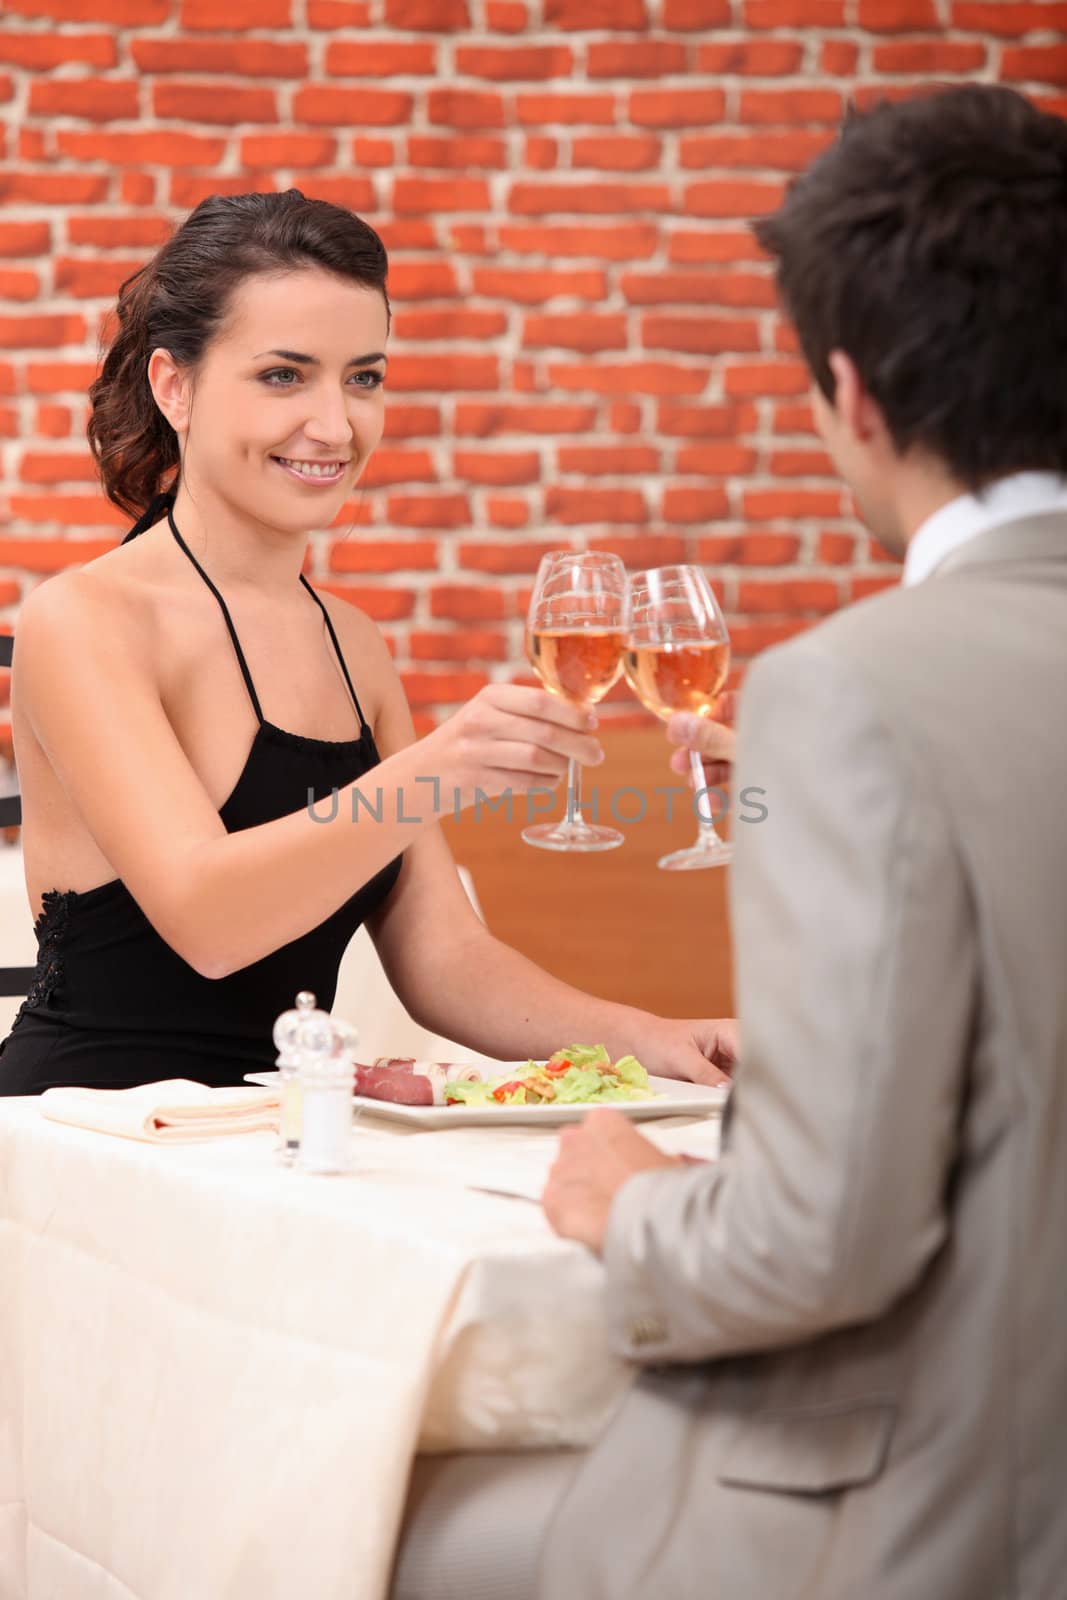 Couple in a restaurant by phovoir